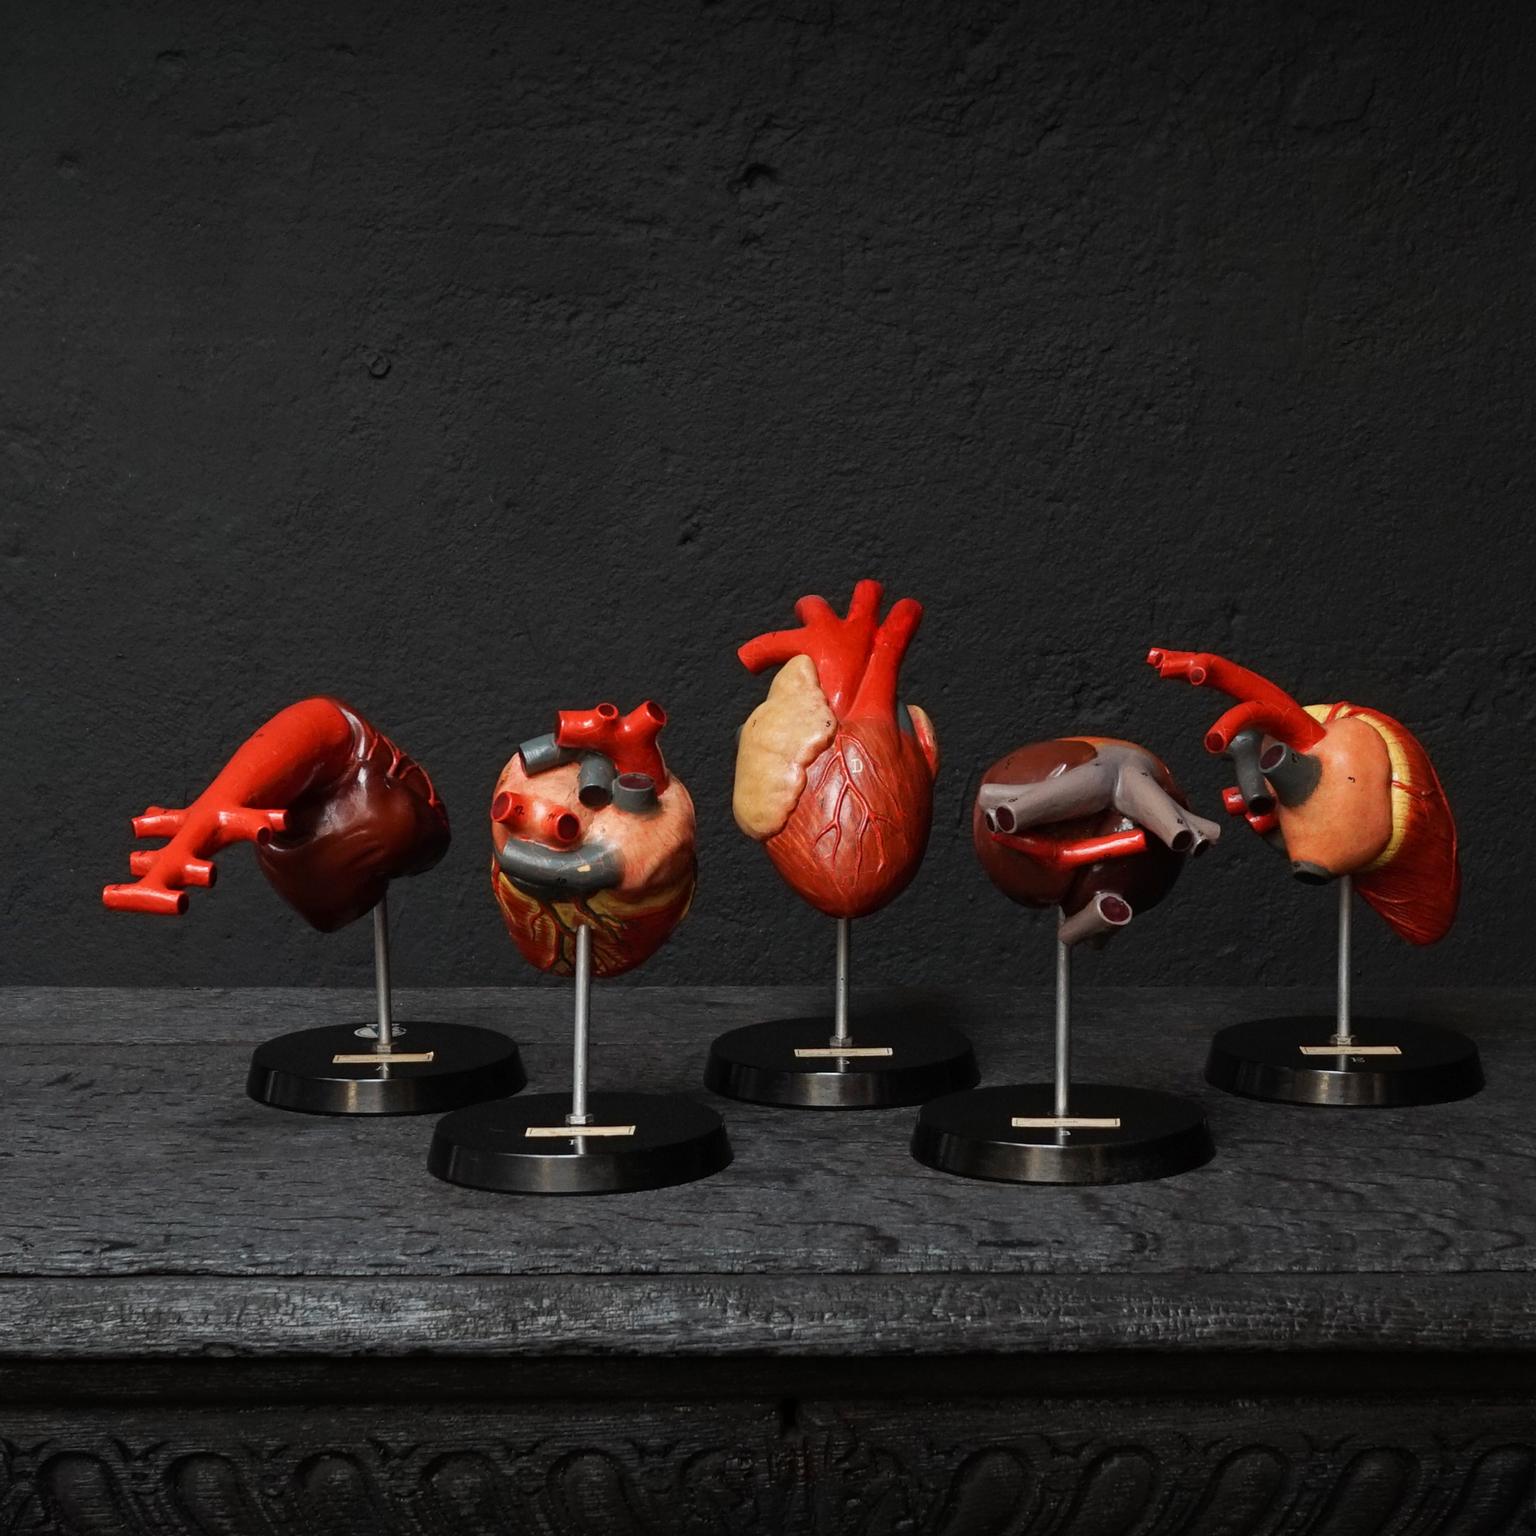 Five German resin hearts on bakelite bases of different animals.
Very detailed dog, crocodile, frog, bird and fish hearts.

Made by VEB Sonnenberg SVL for anatomical studies, hand painted, numbered and labeled.

Very decorative curiosity set